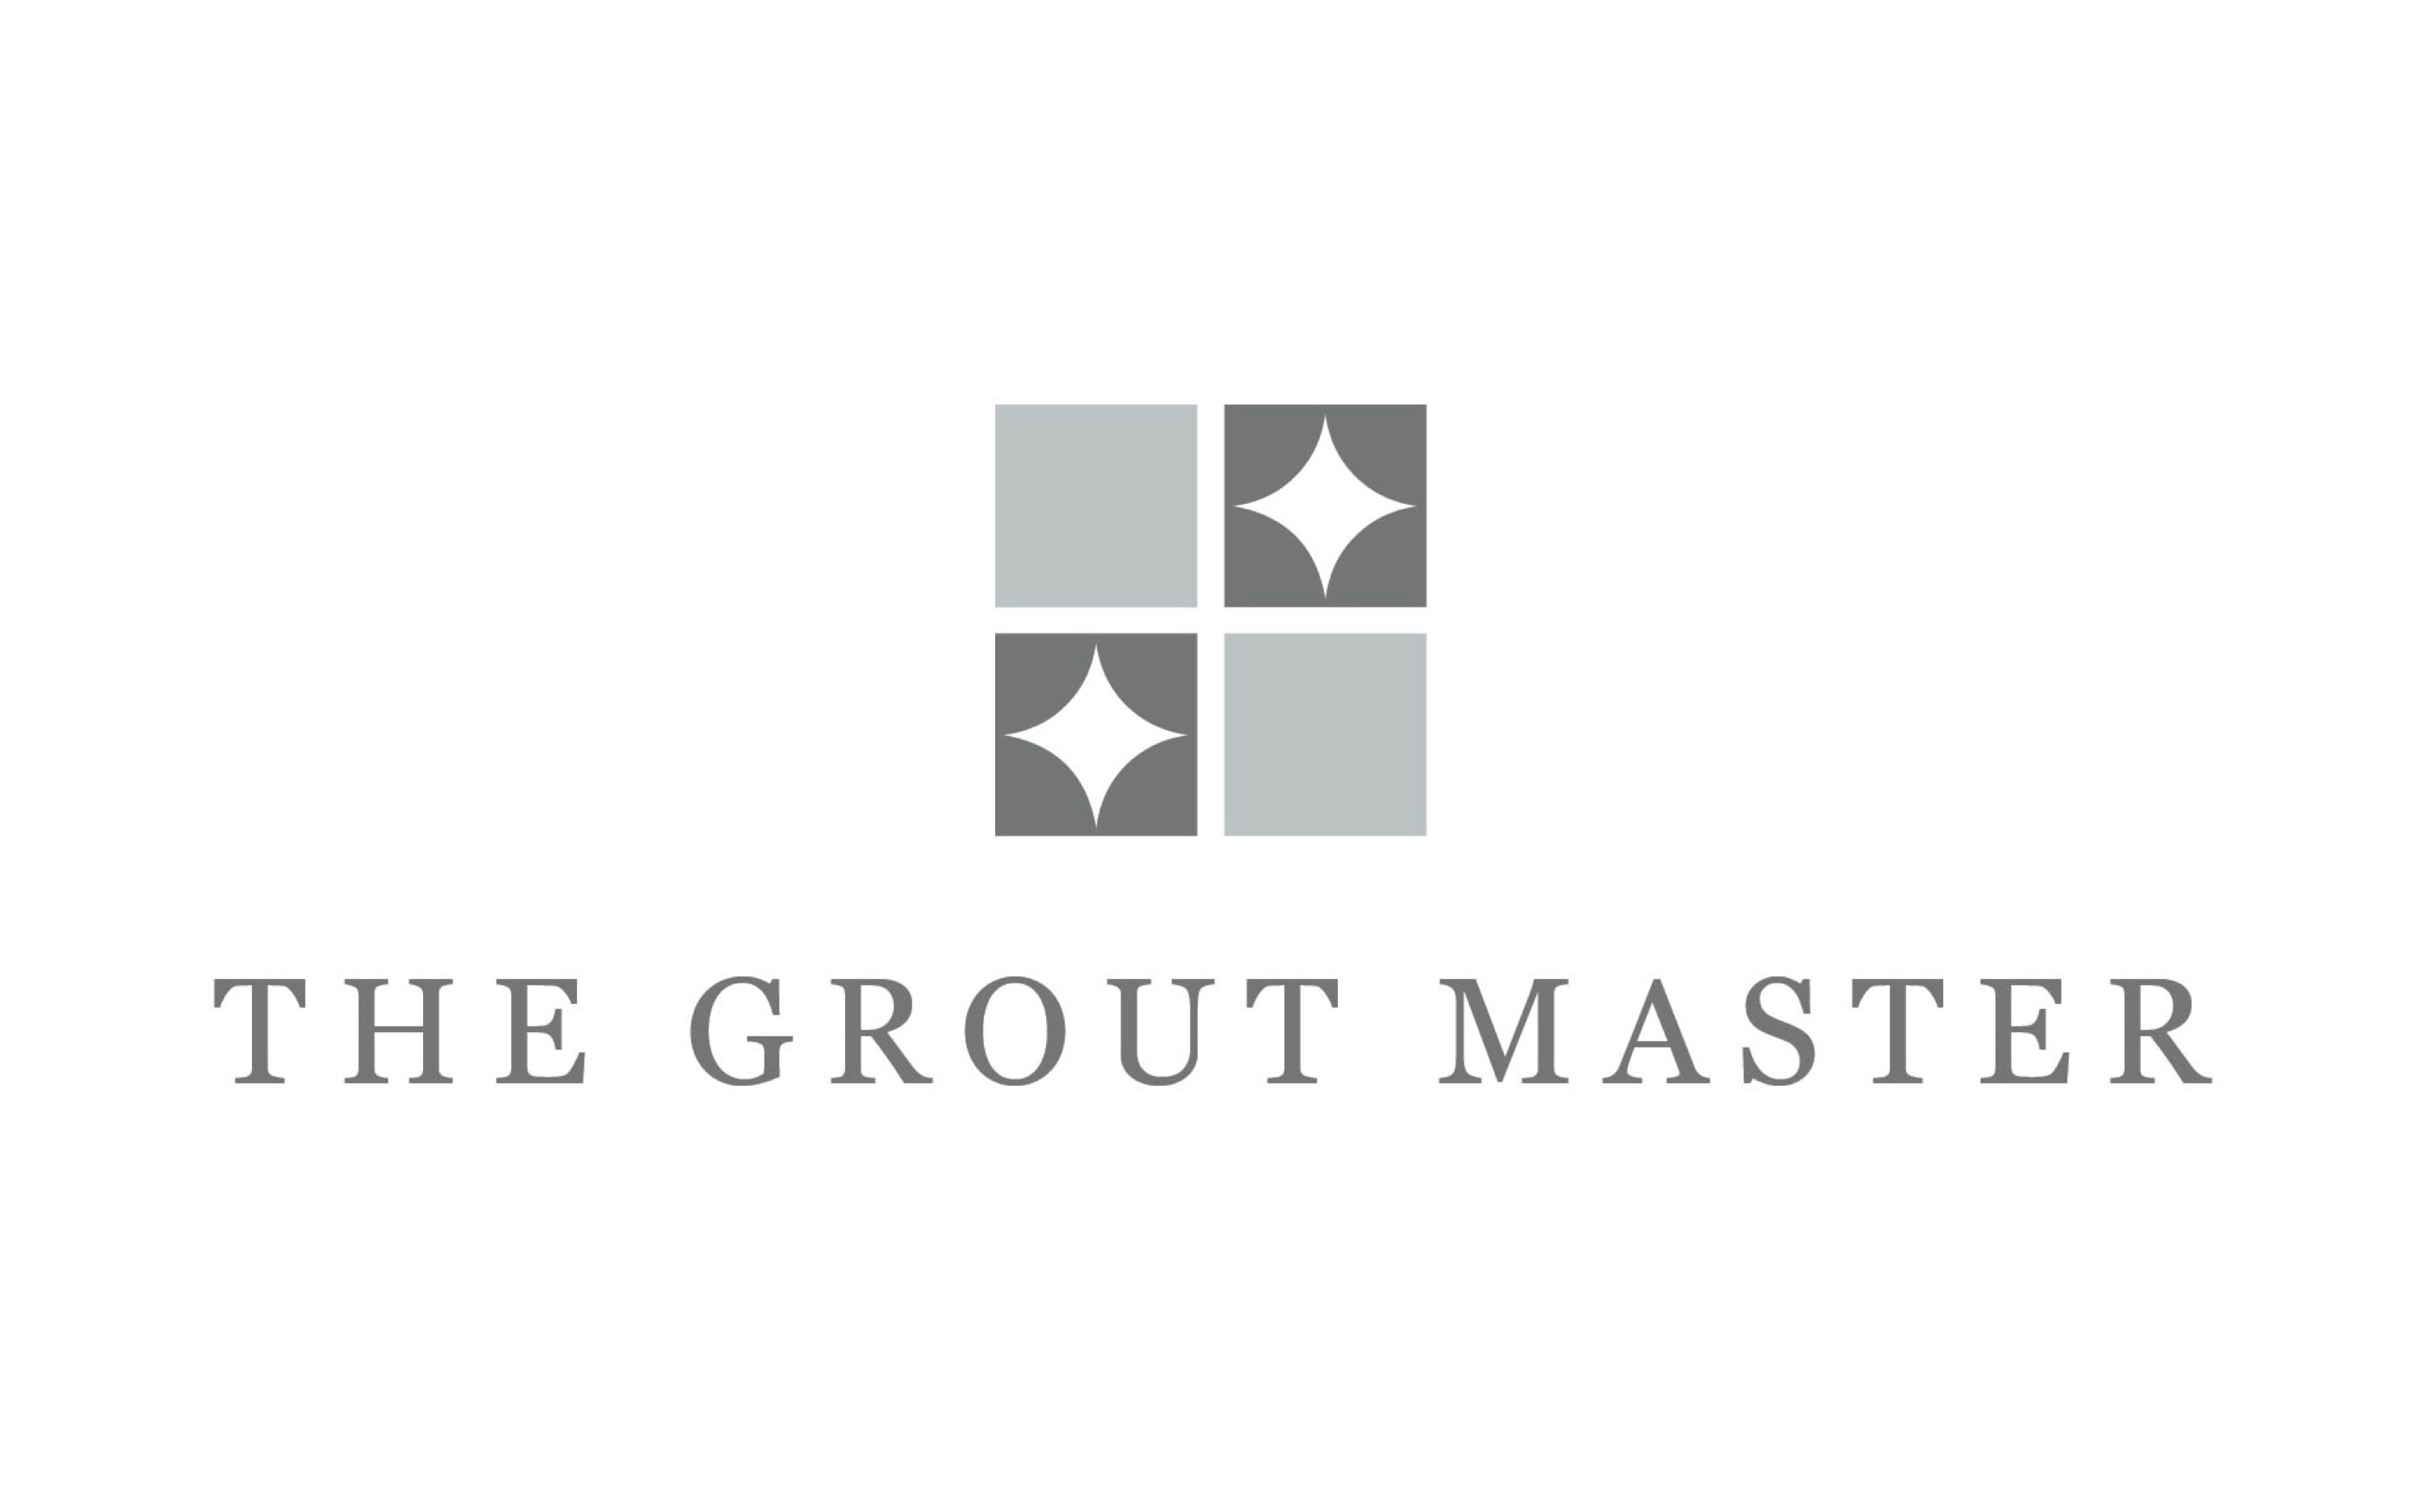 The Grout Master Logo